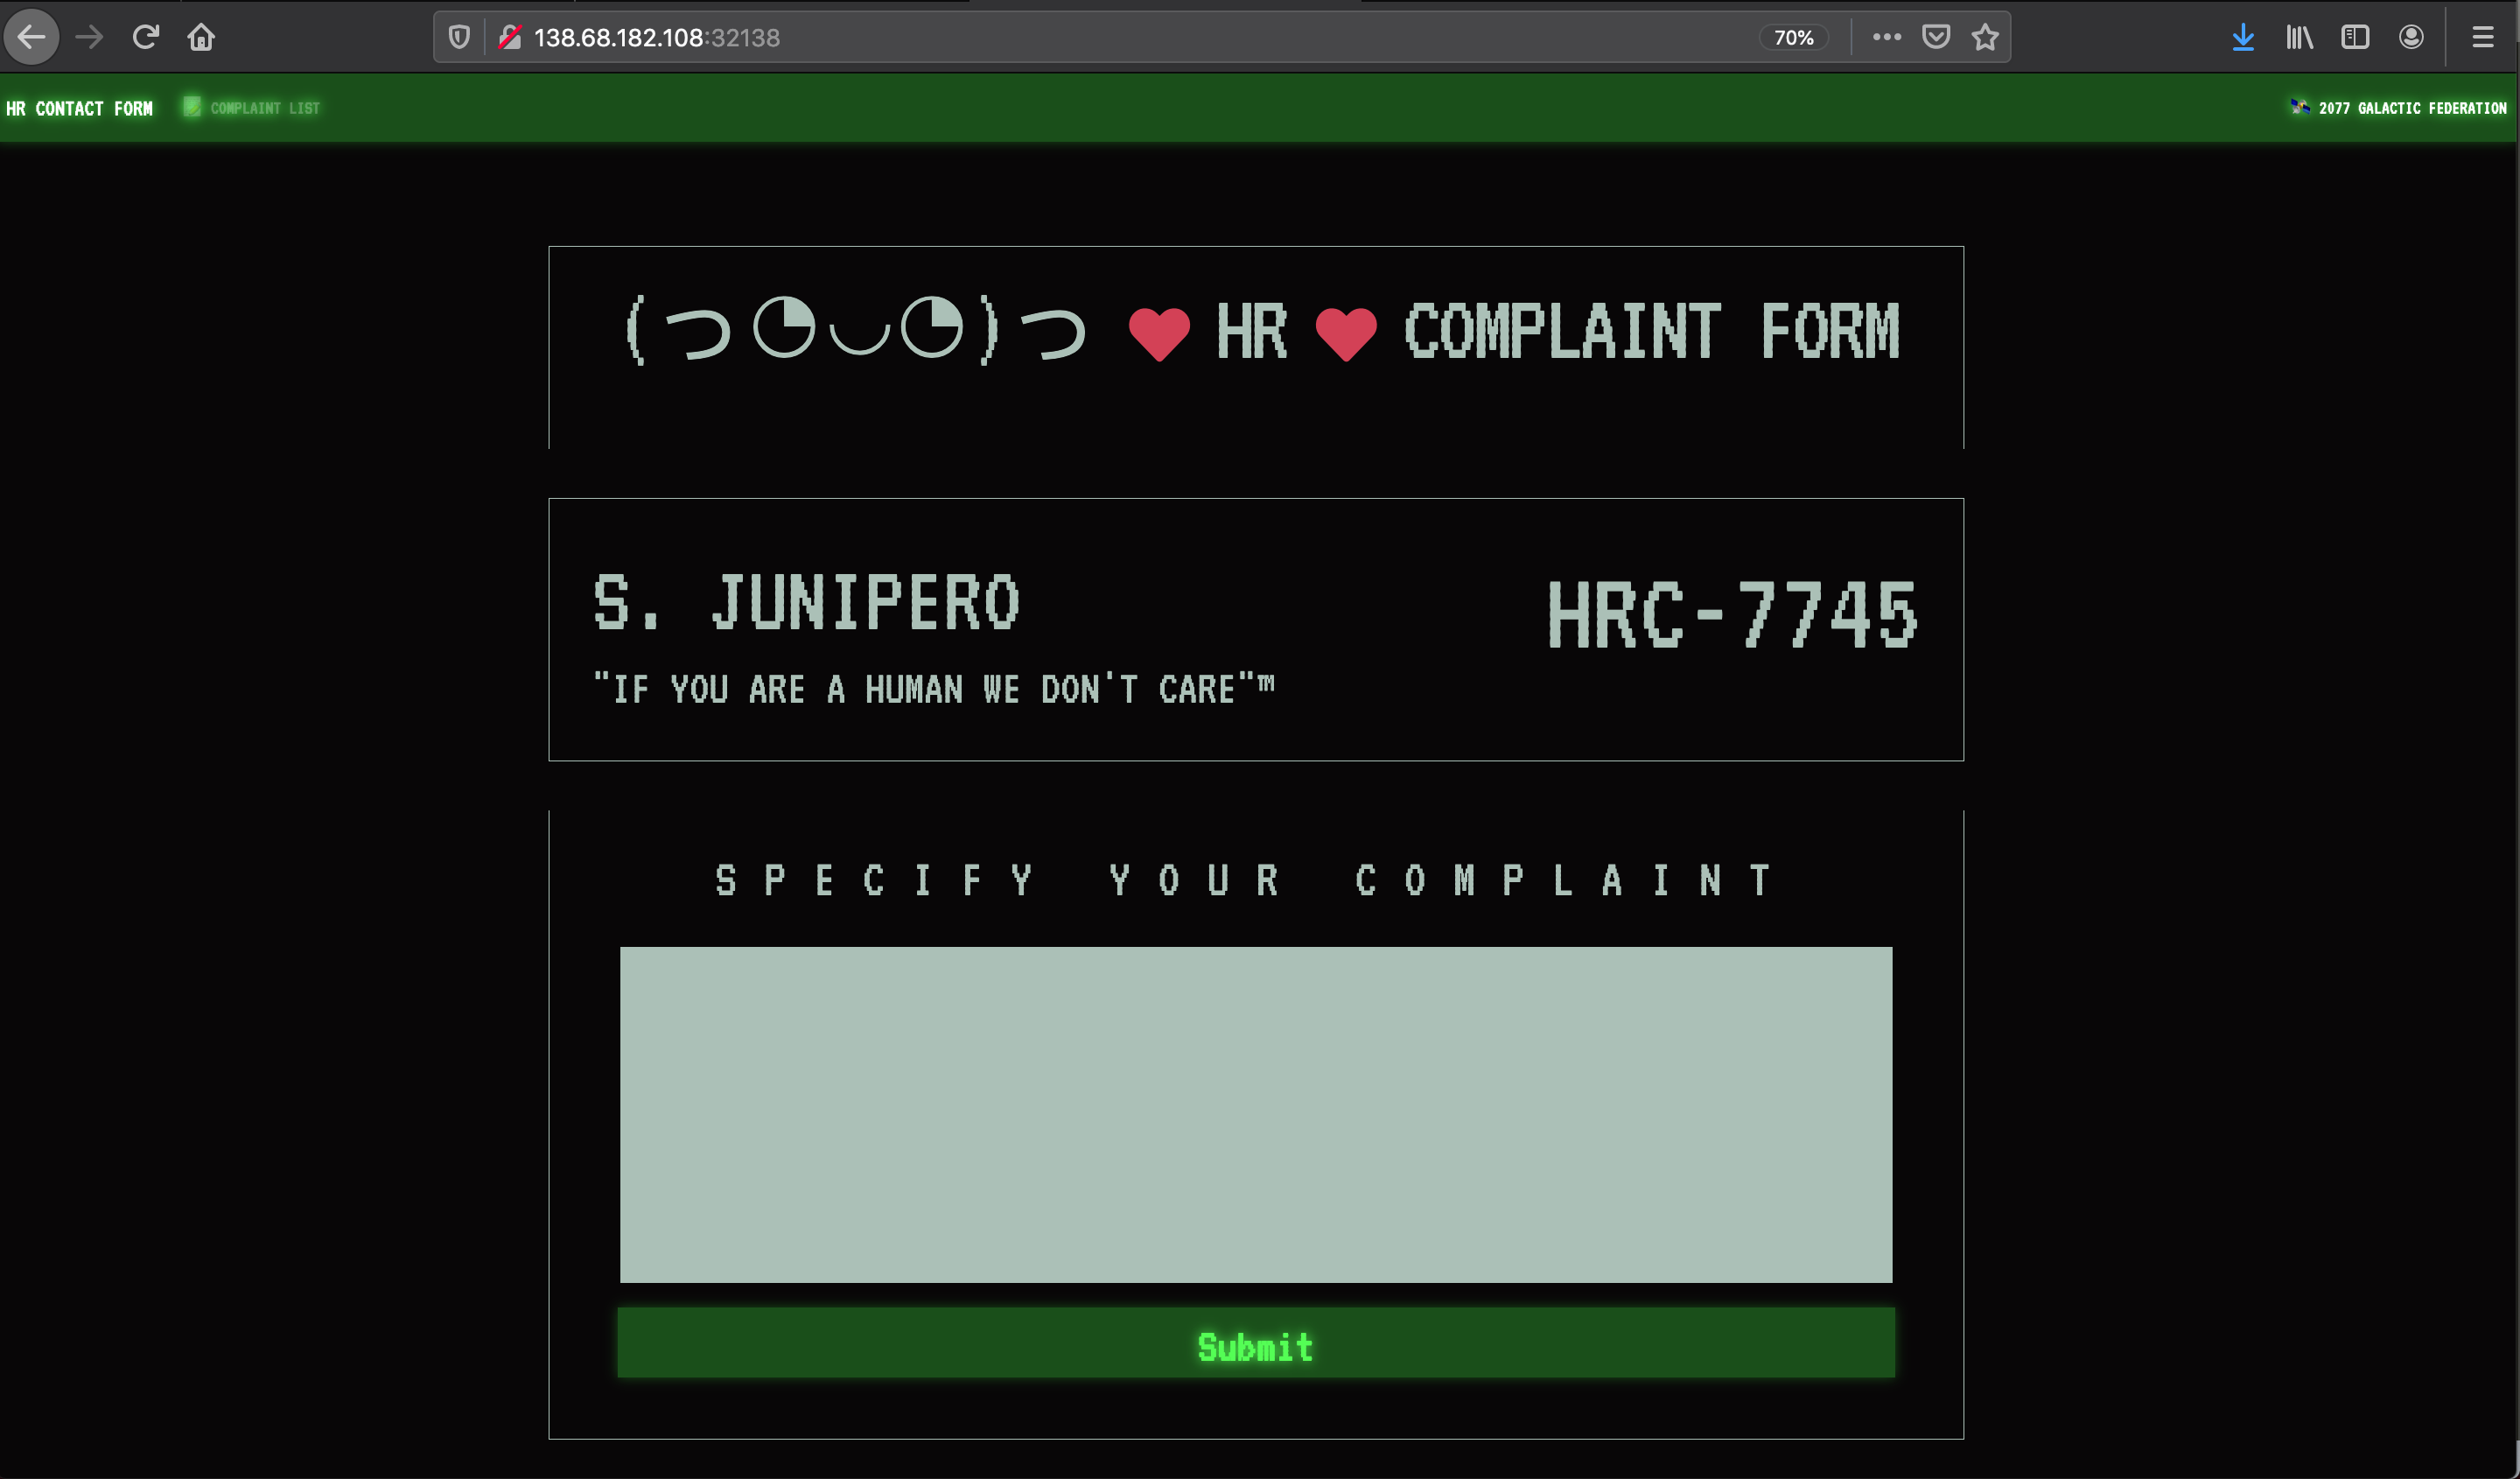 /images/posts/ctf/Cyber-Apocalypse-2021/Alien-complaint-form/Screen_Shot_2021-04-24_at_23.27.37.png